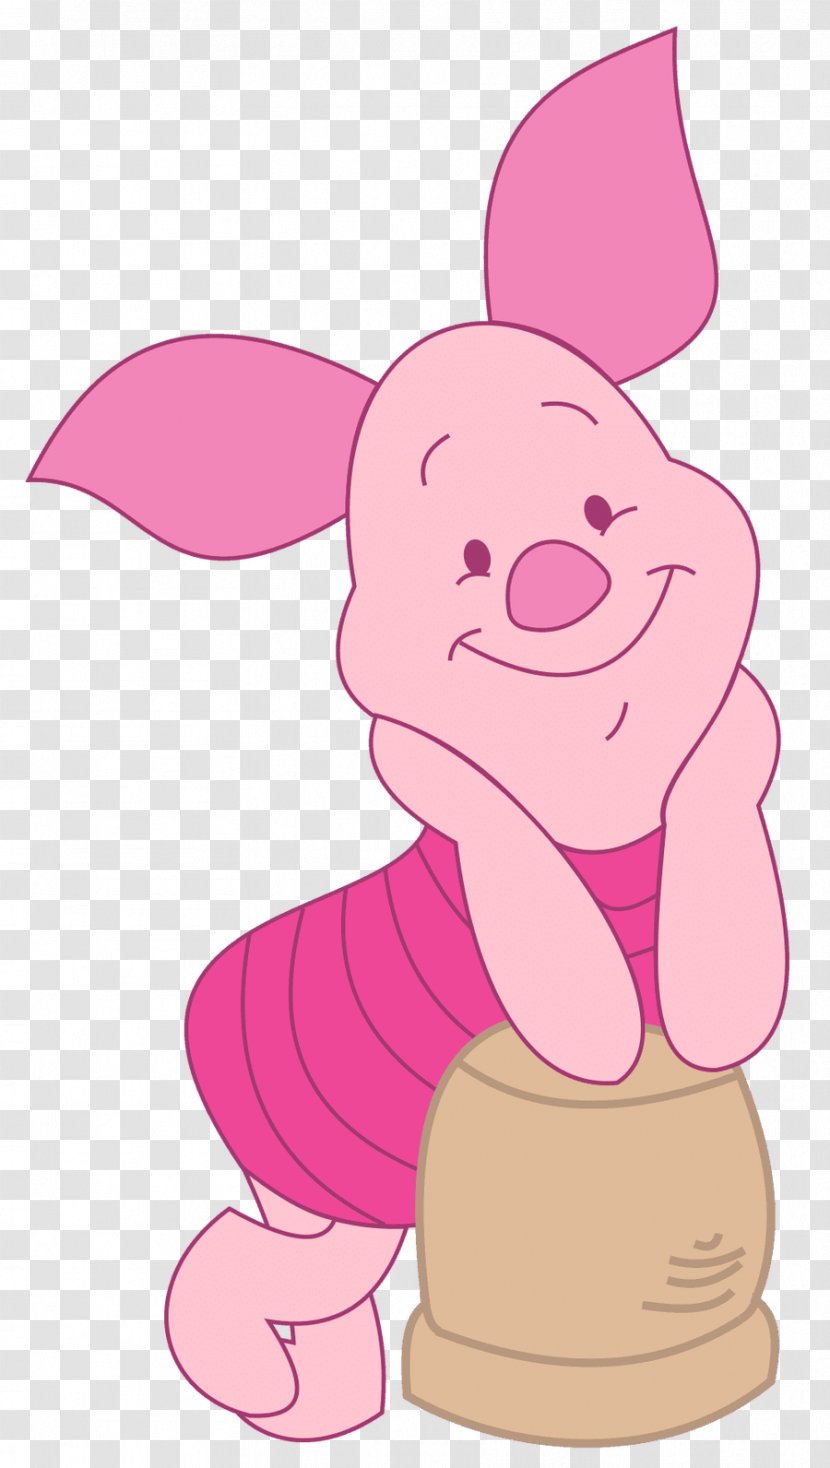 Piglet Winnie The Pooh Minnie Mouse Daisy Duck Tigger - Frame Transparent PNG